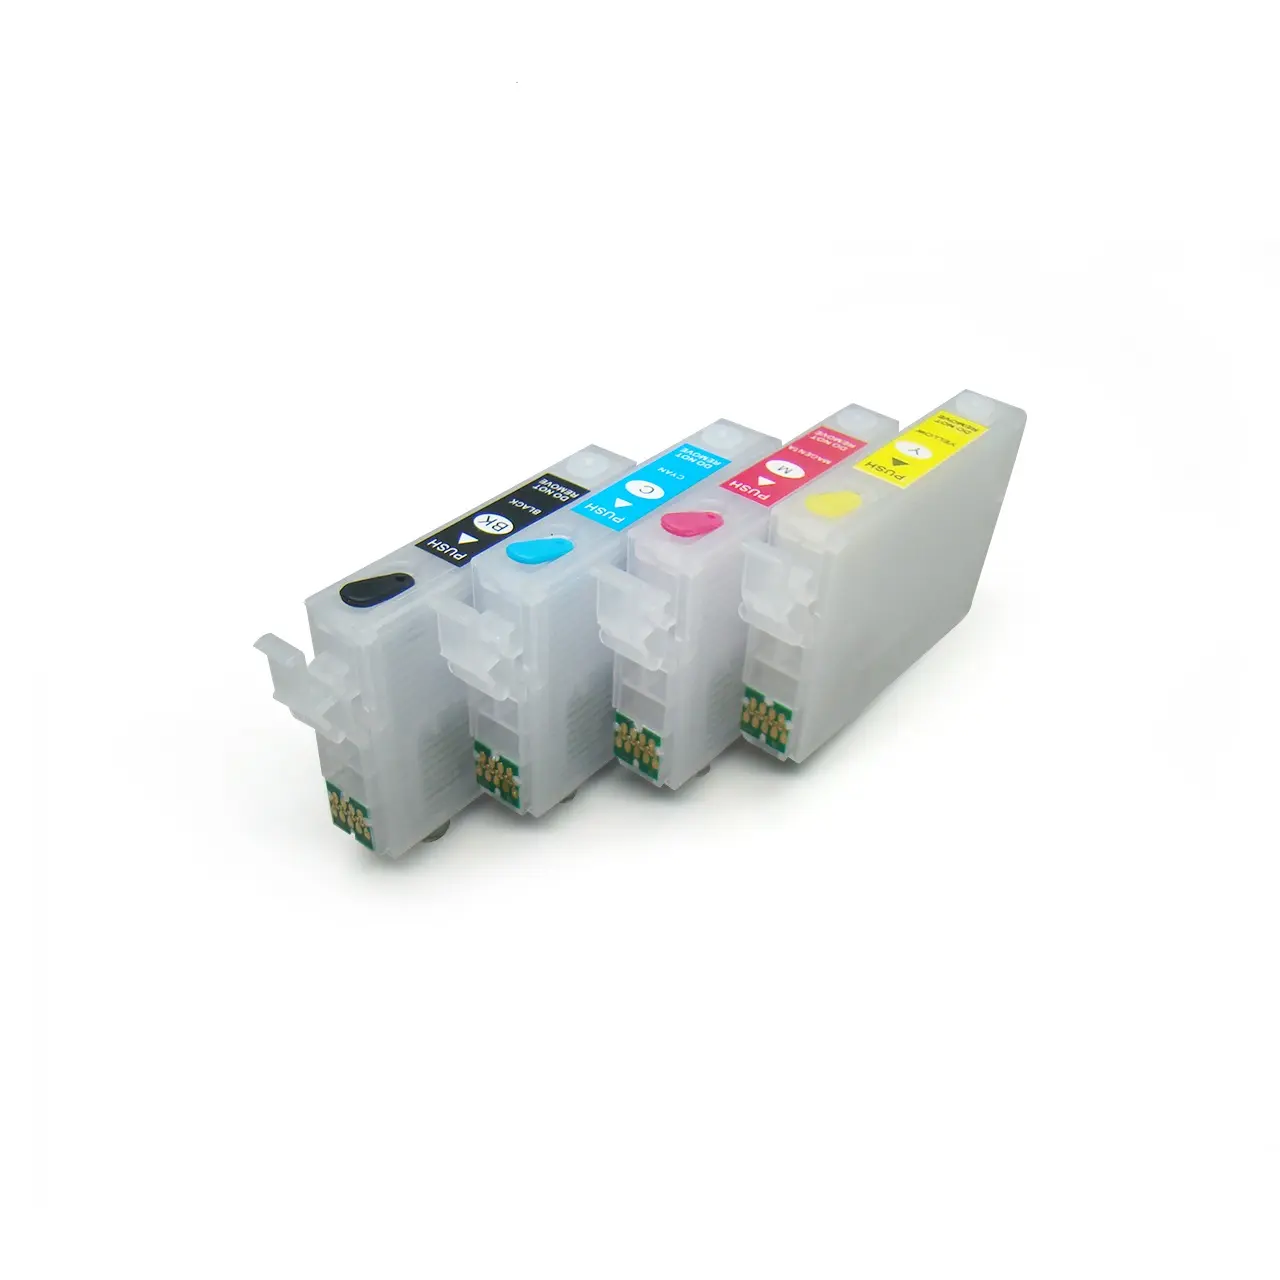 for Epson 604/503 empty refillable cartridges with auto reset chip for Expression Home XP-2200 XP-5200 printer